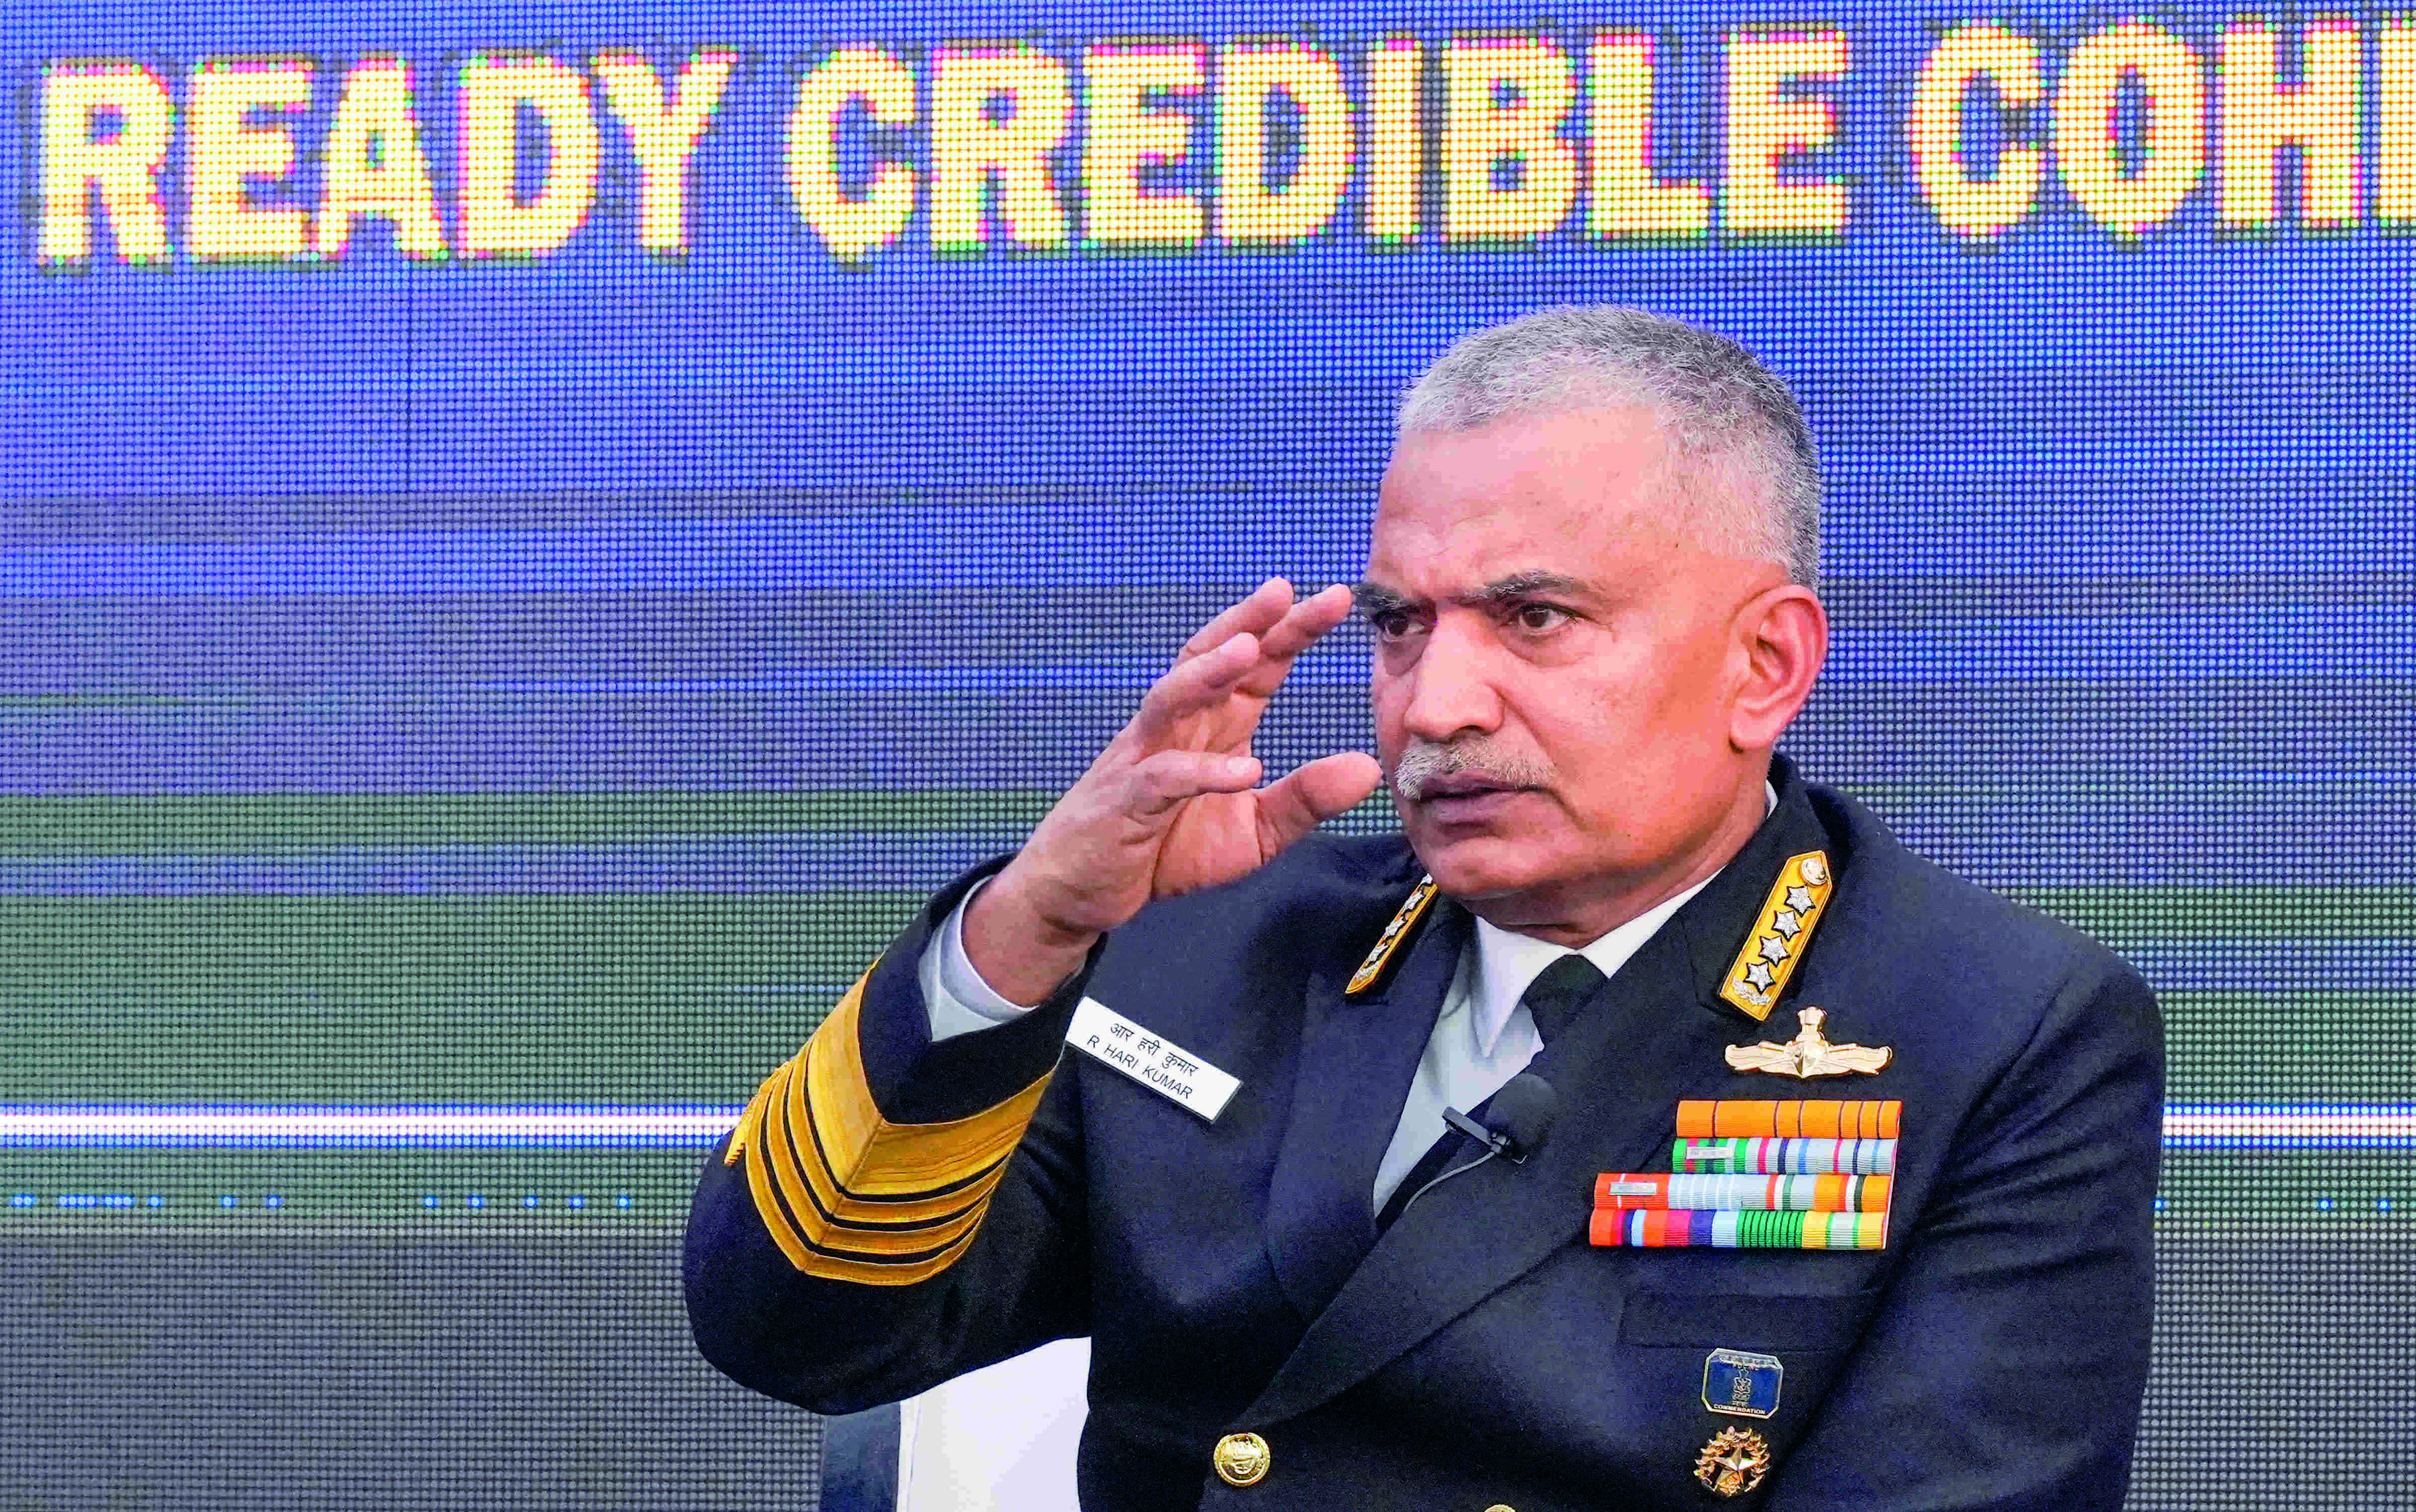 Navy aims to become self-reliant by 2047: Chief Admiral Kumar